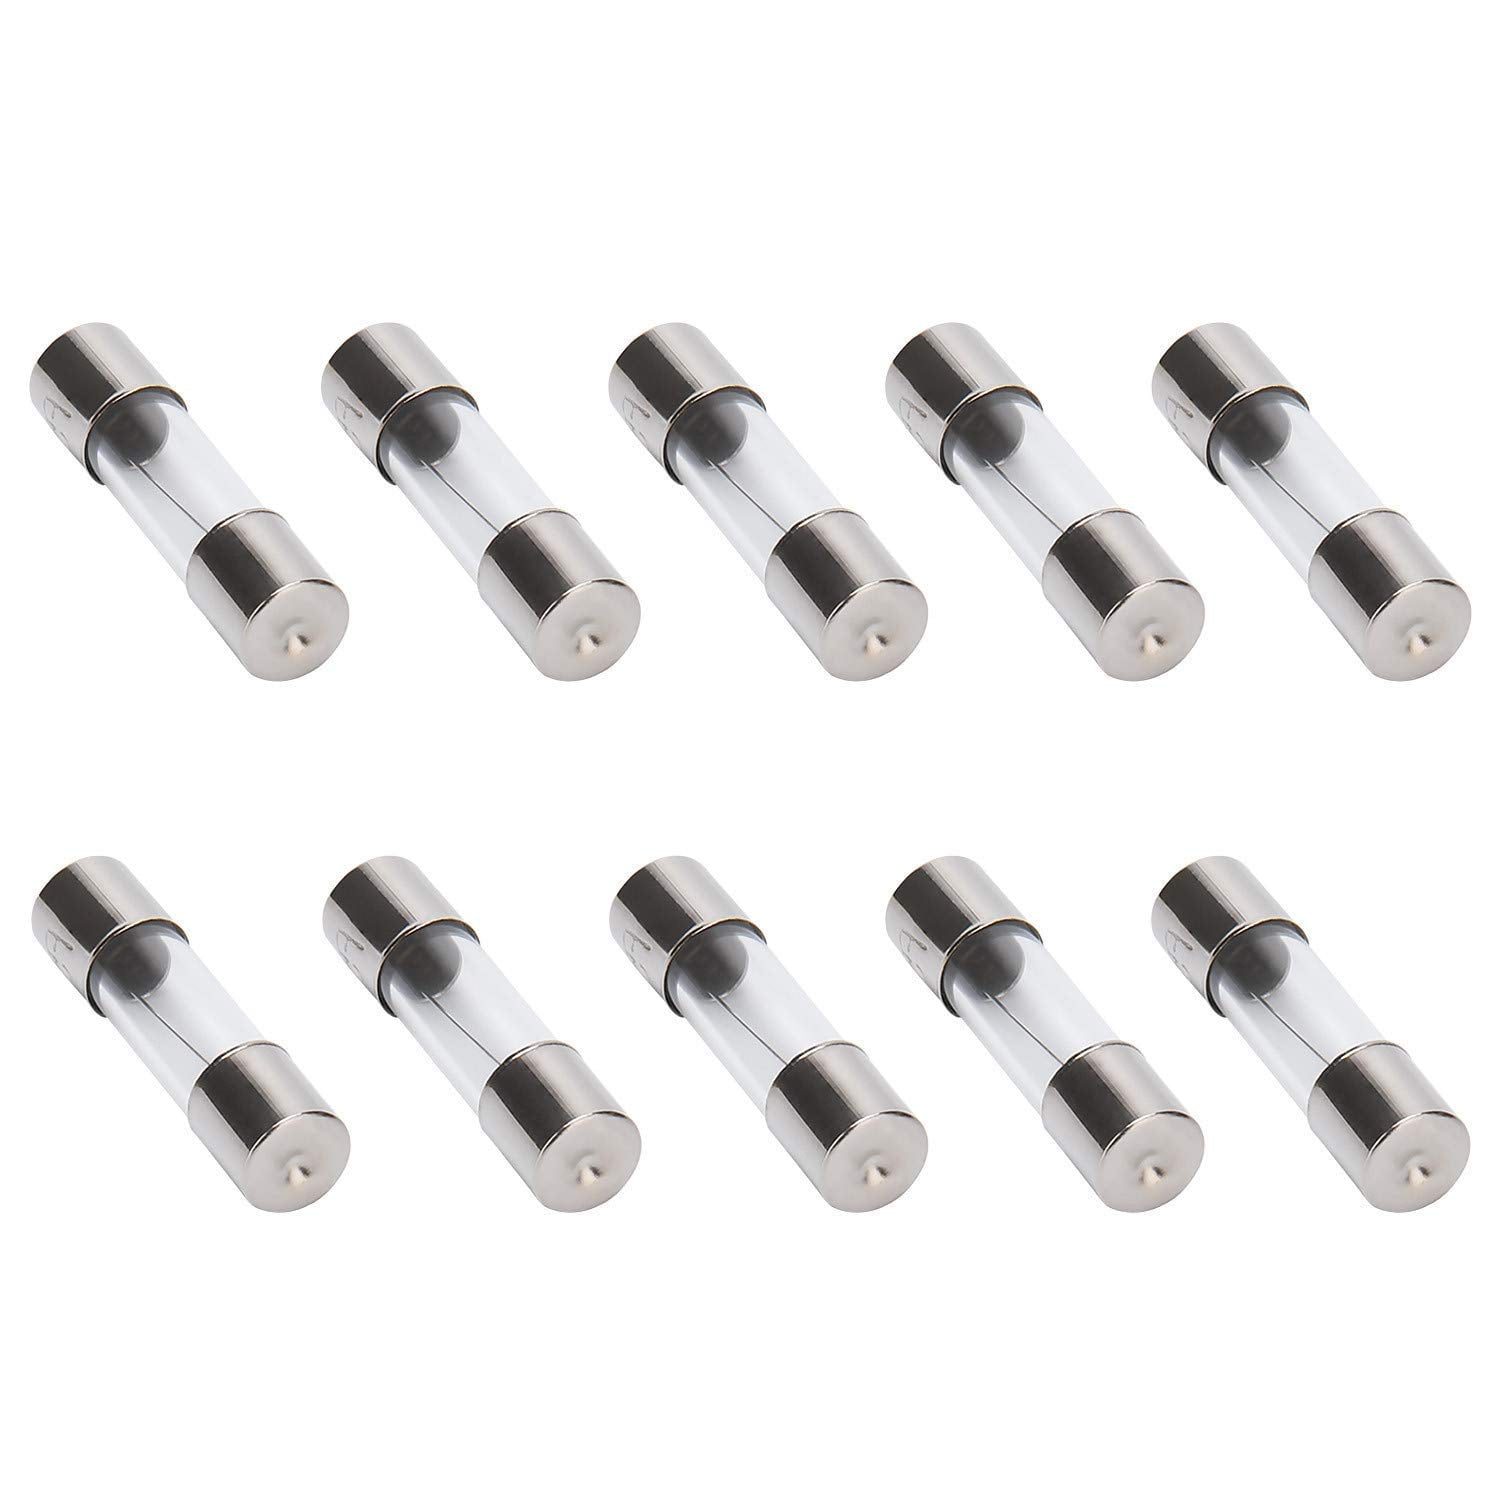 10pcs 5A 5x20mm Fast Blow Glass Tube Fuse  5Amp 5mmx20mm 10 pack 